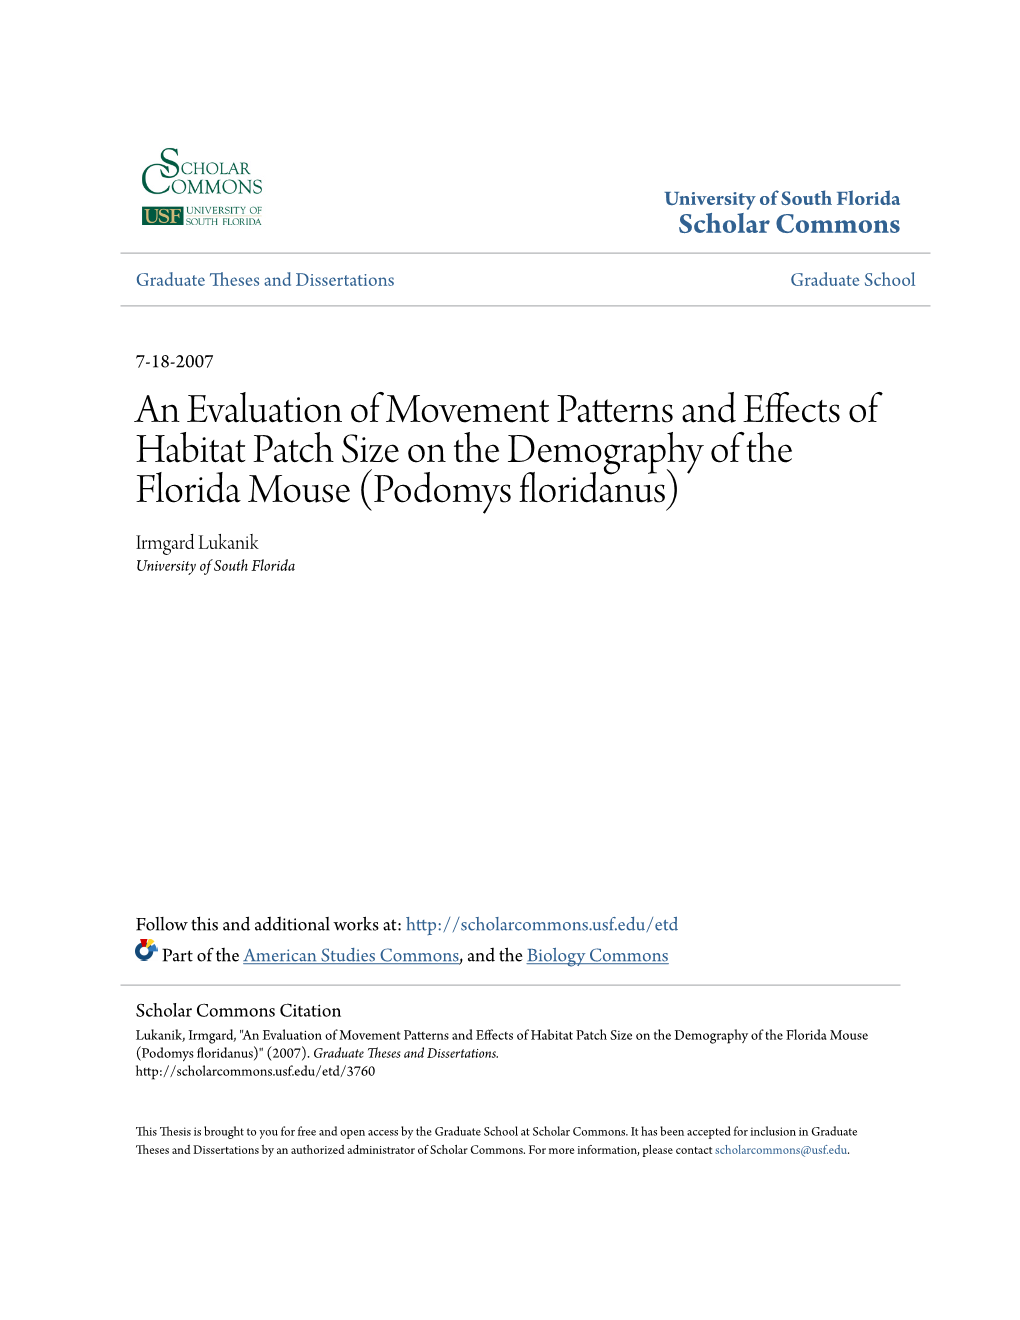 An Evaluation of Movement Patterns And